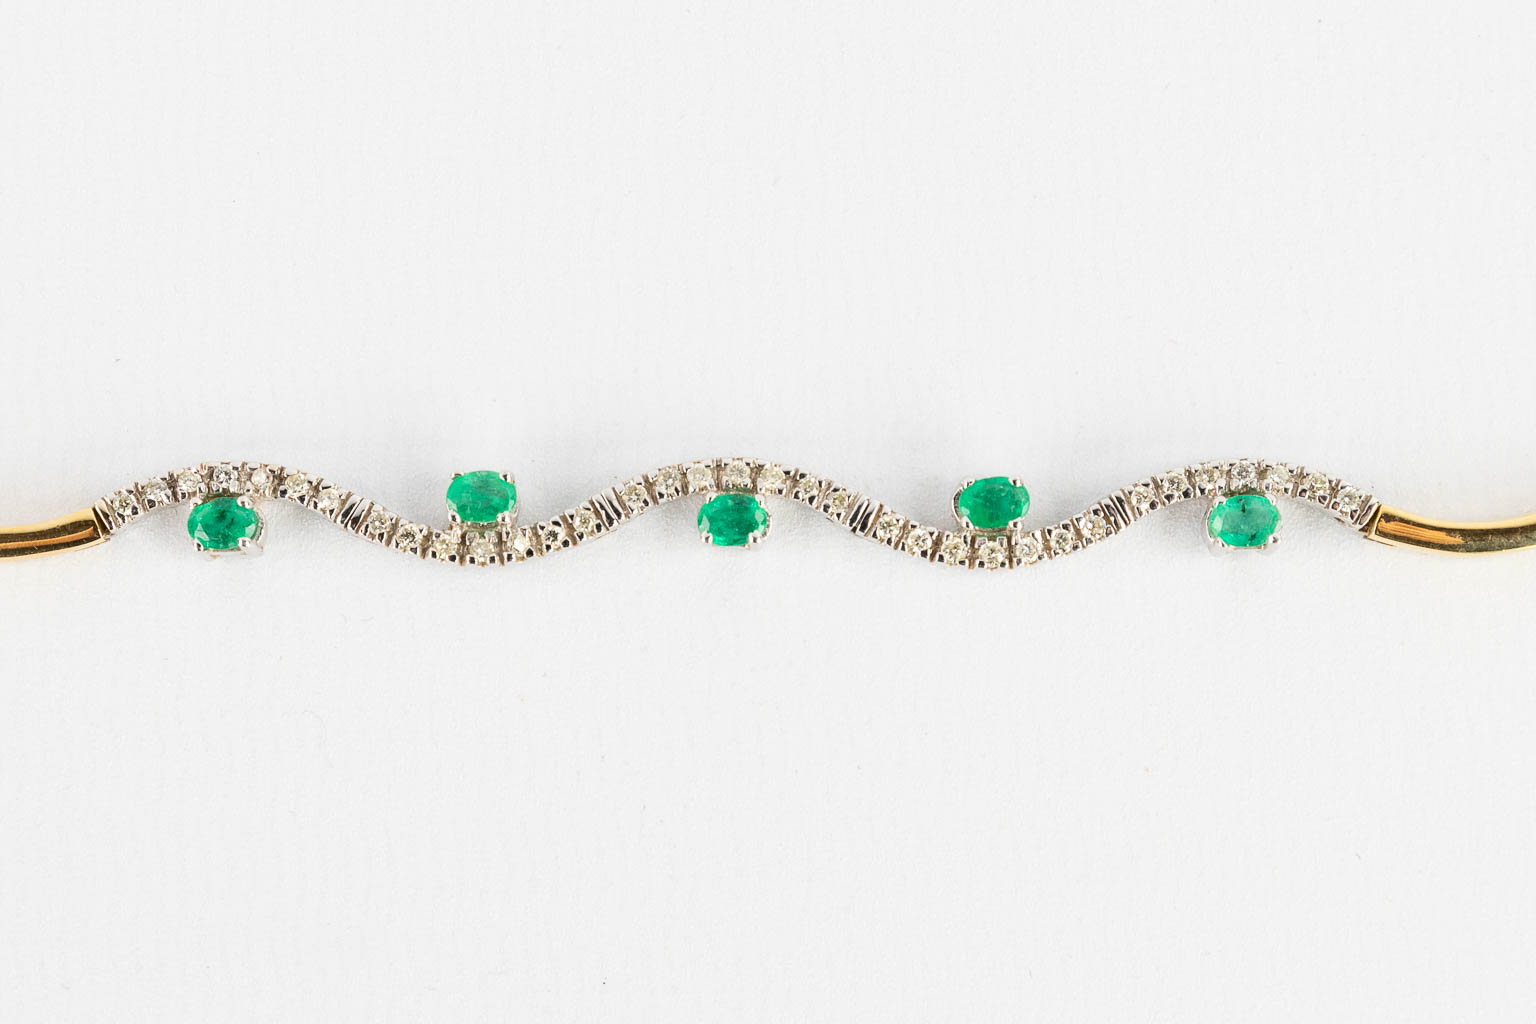 A necklace, 18 karats yellow and white gold, decorated with green, probably, emeralds. 24,67g.